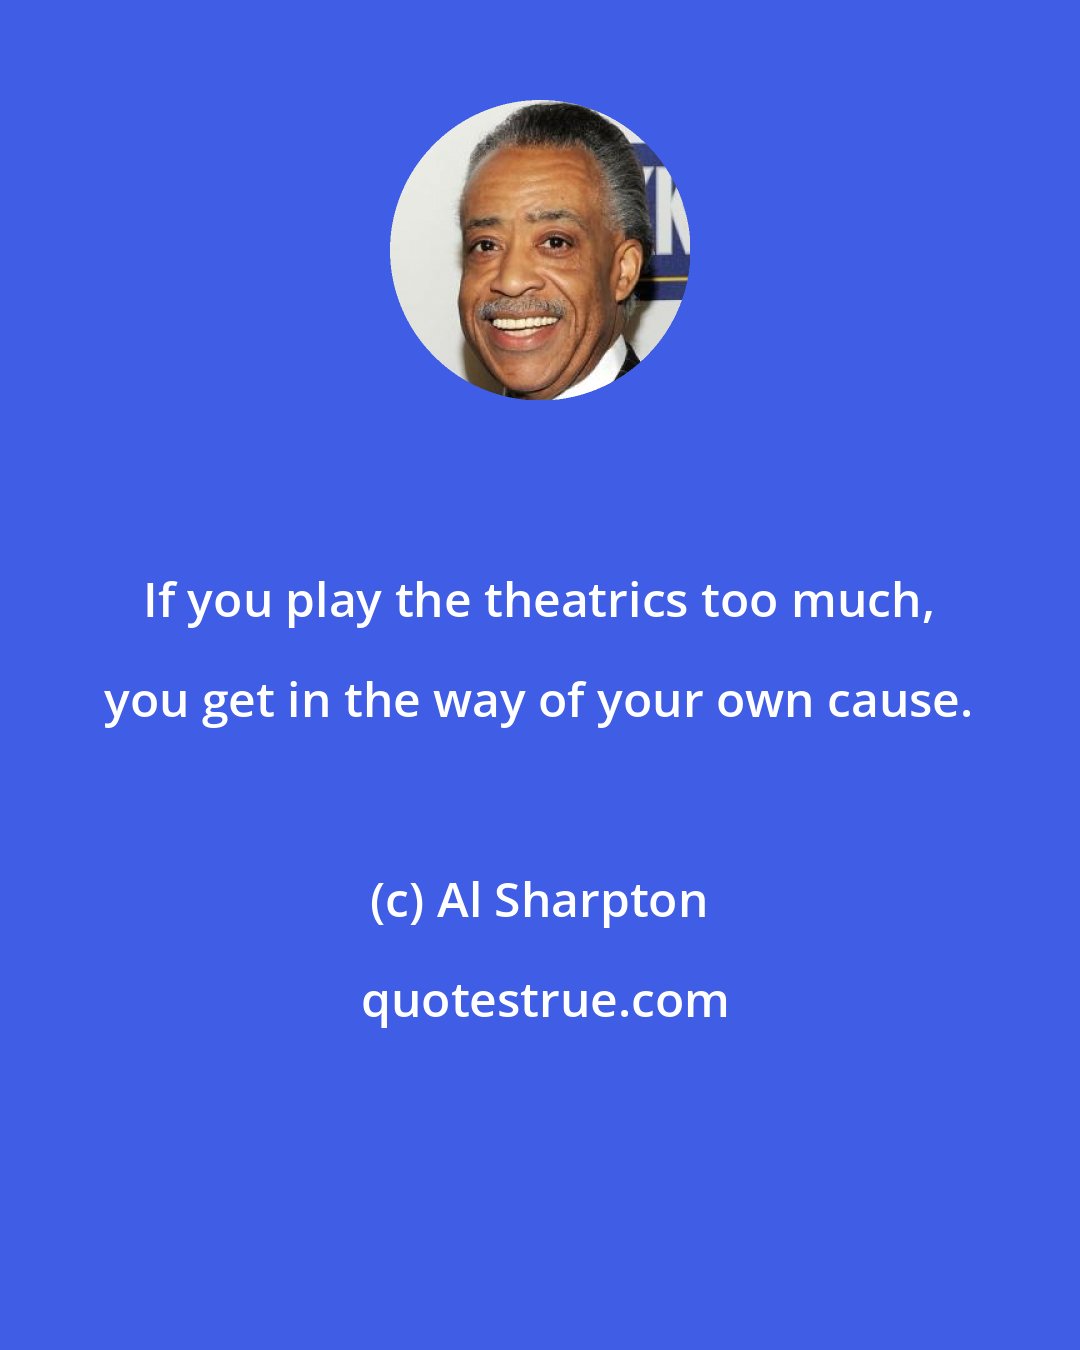 Al Sharpton: If you play the theatrics too much, you get in the way of your own cause.